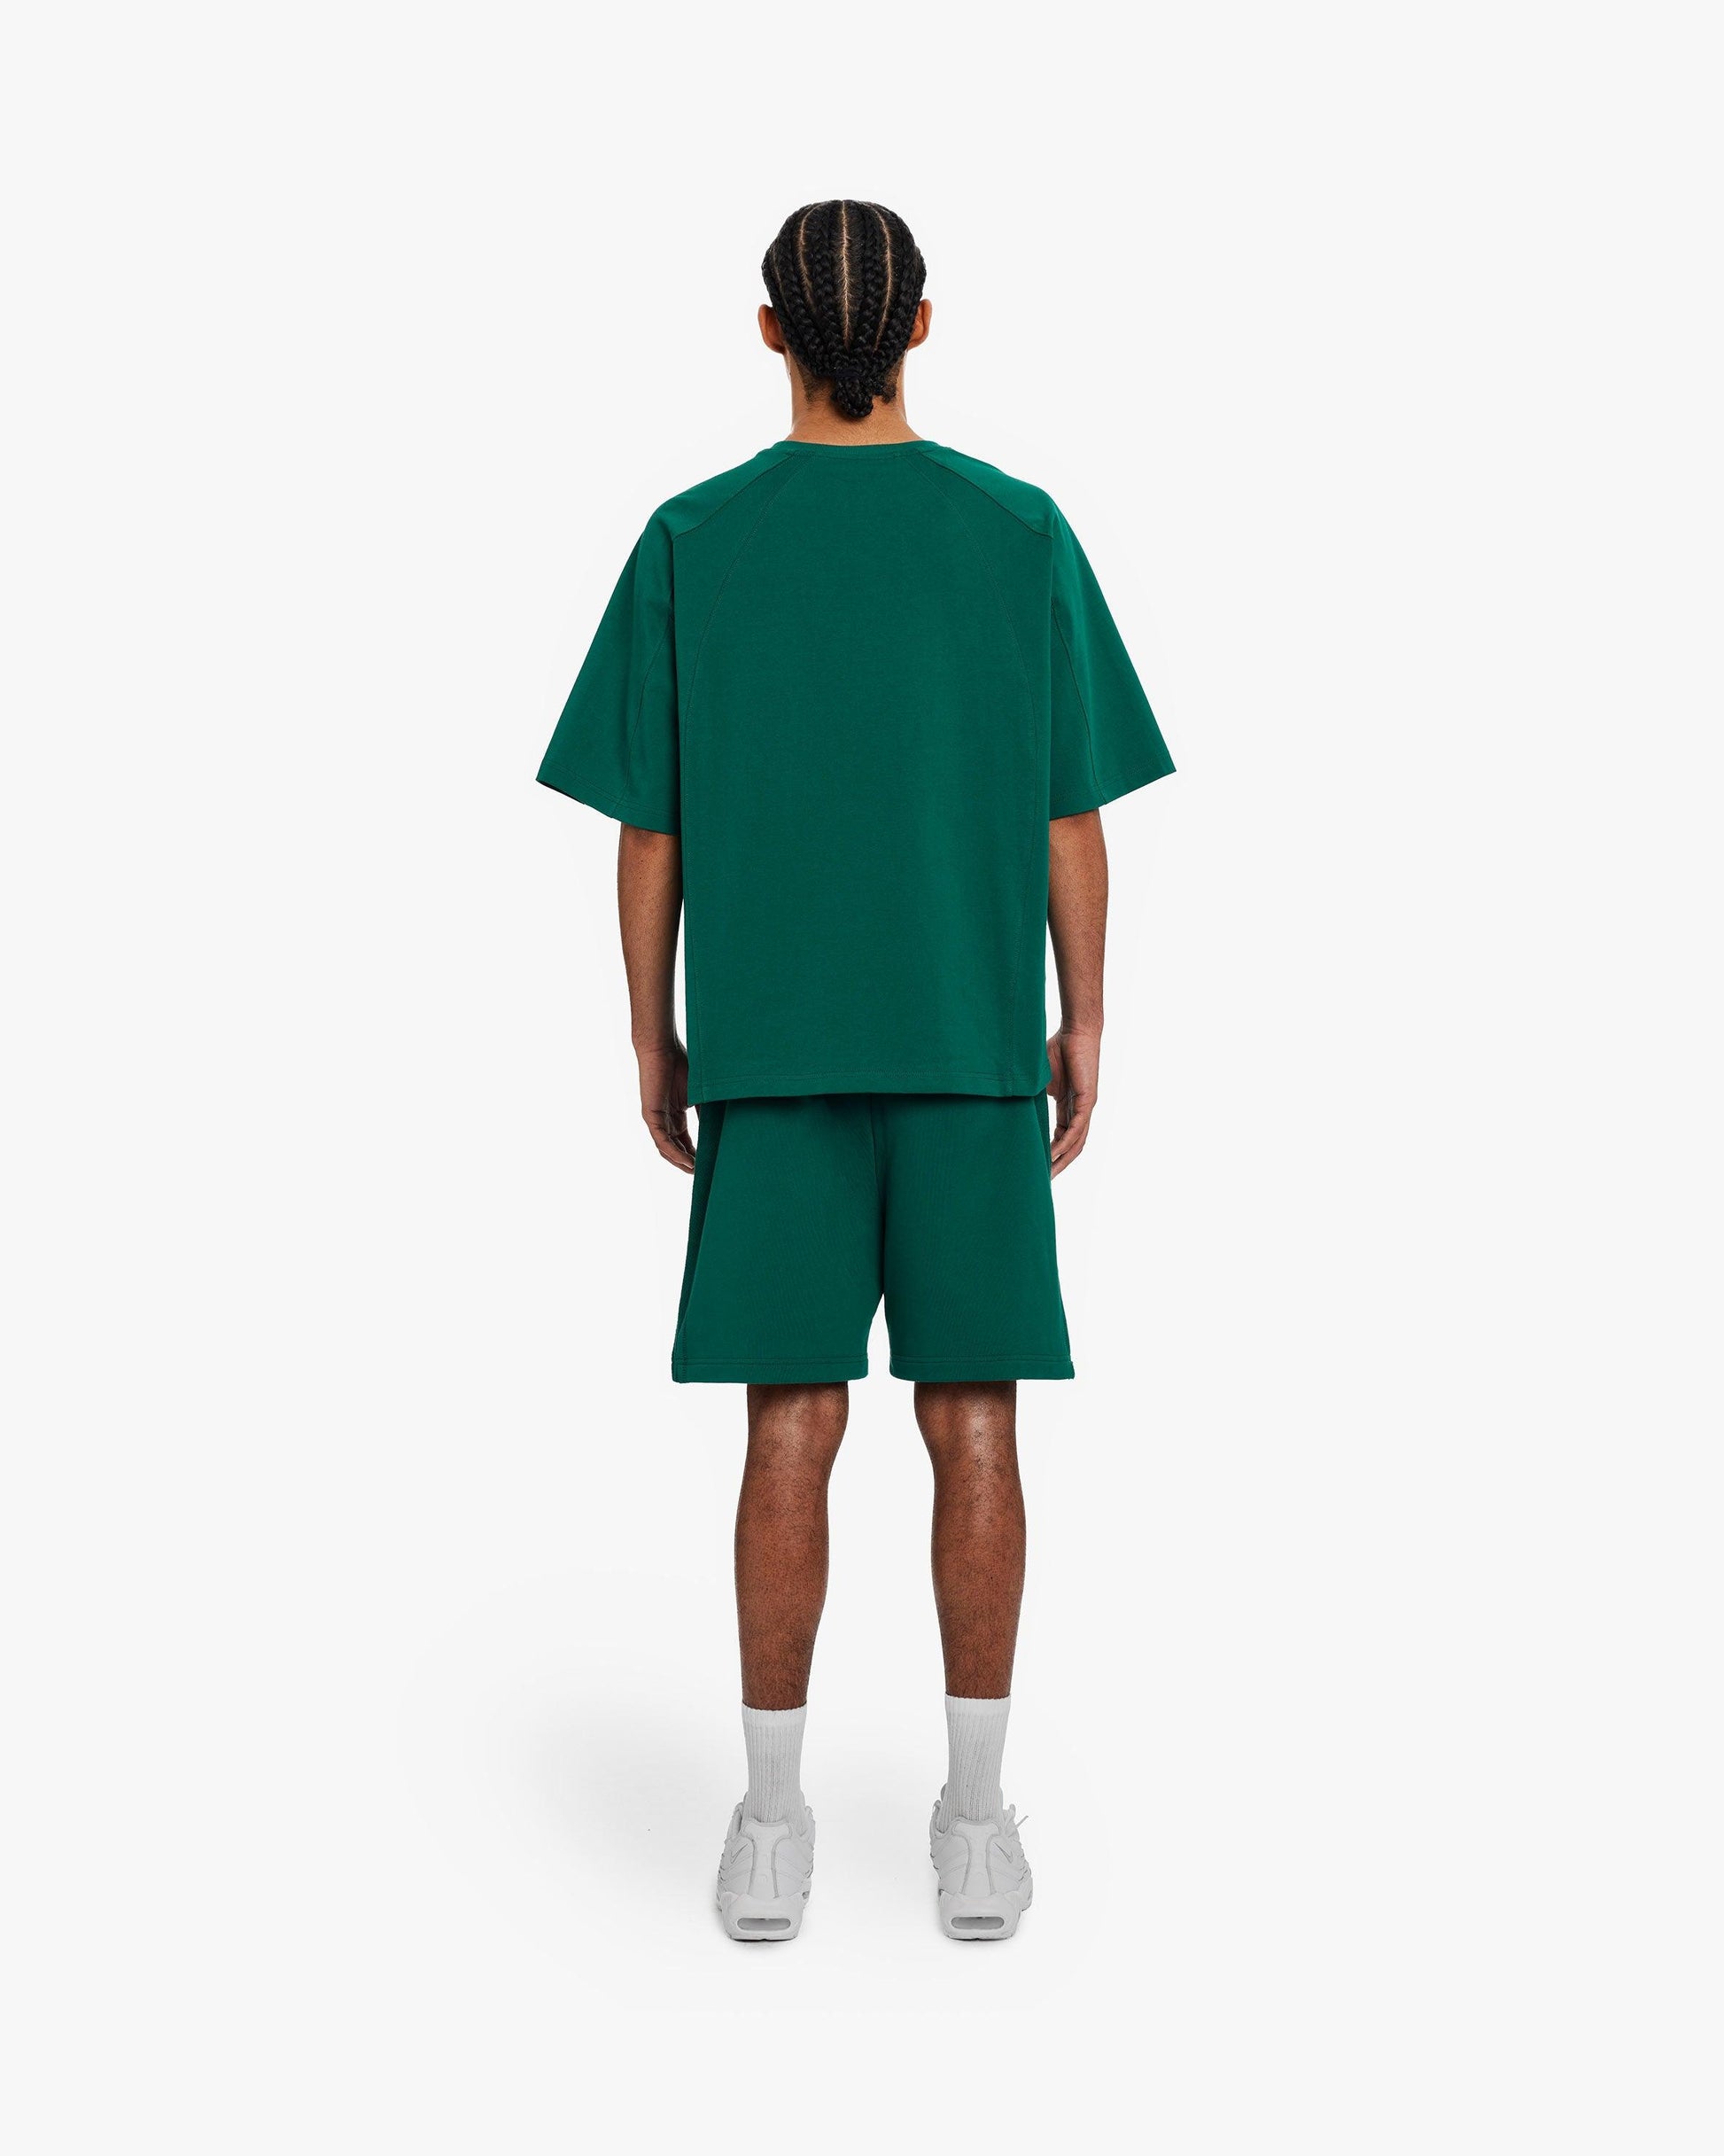 T-SHIRT FORREST GREEN - VICINITY